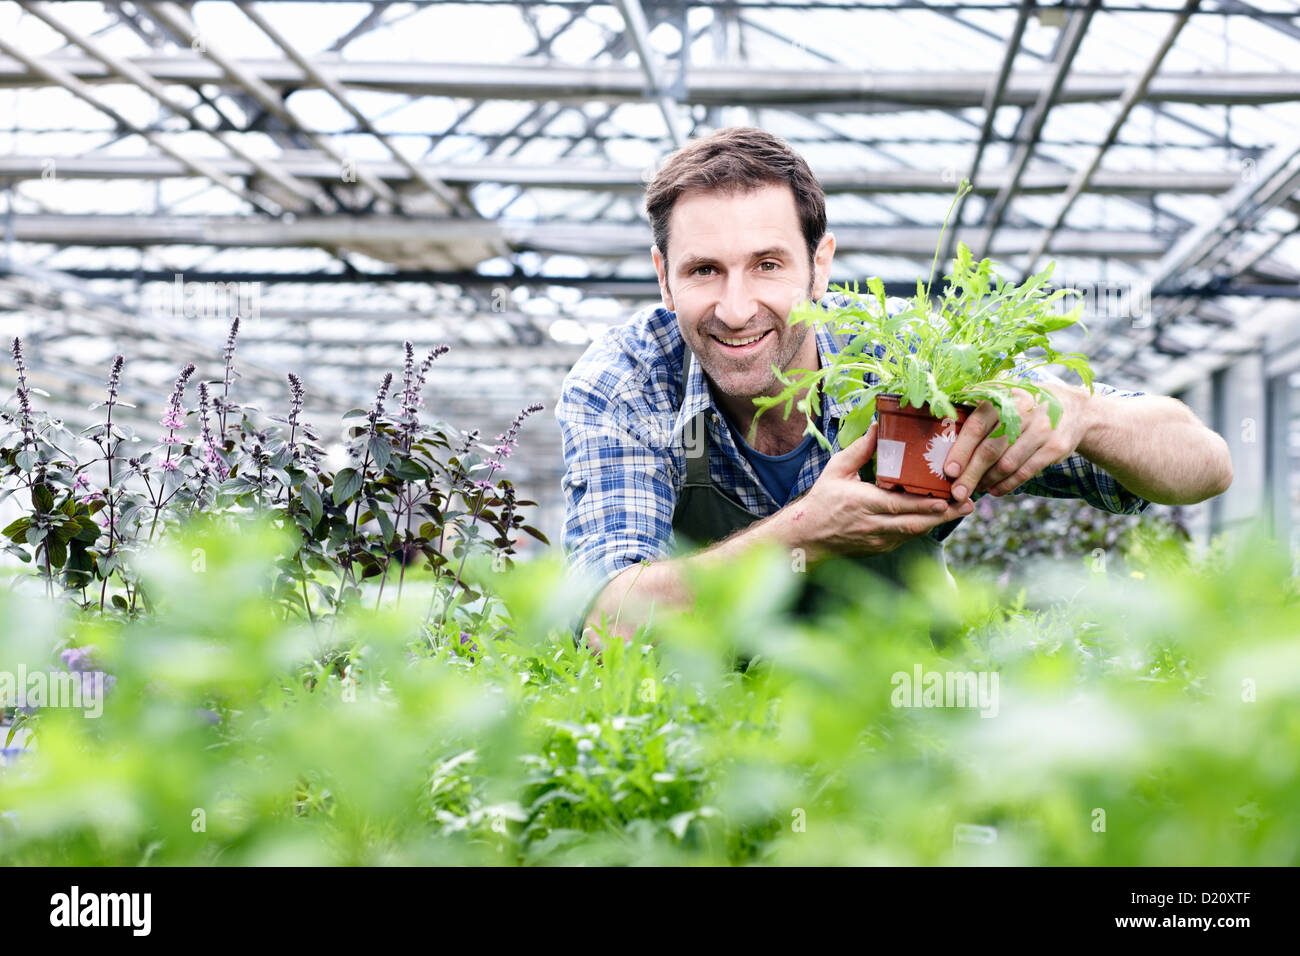 Germany, Bavaria, Munich, Mature man in greenhouse with rocket plant Stock Photo